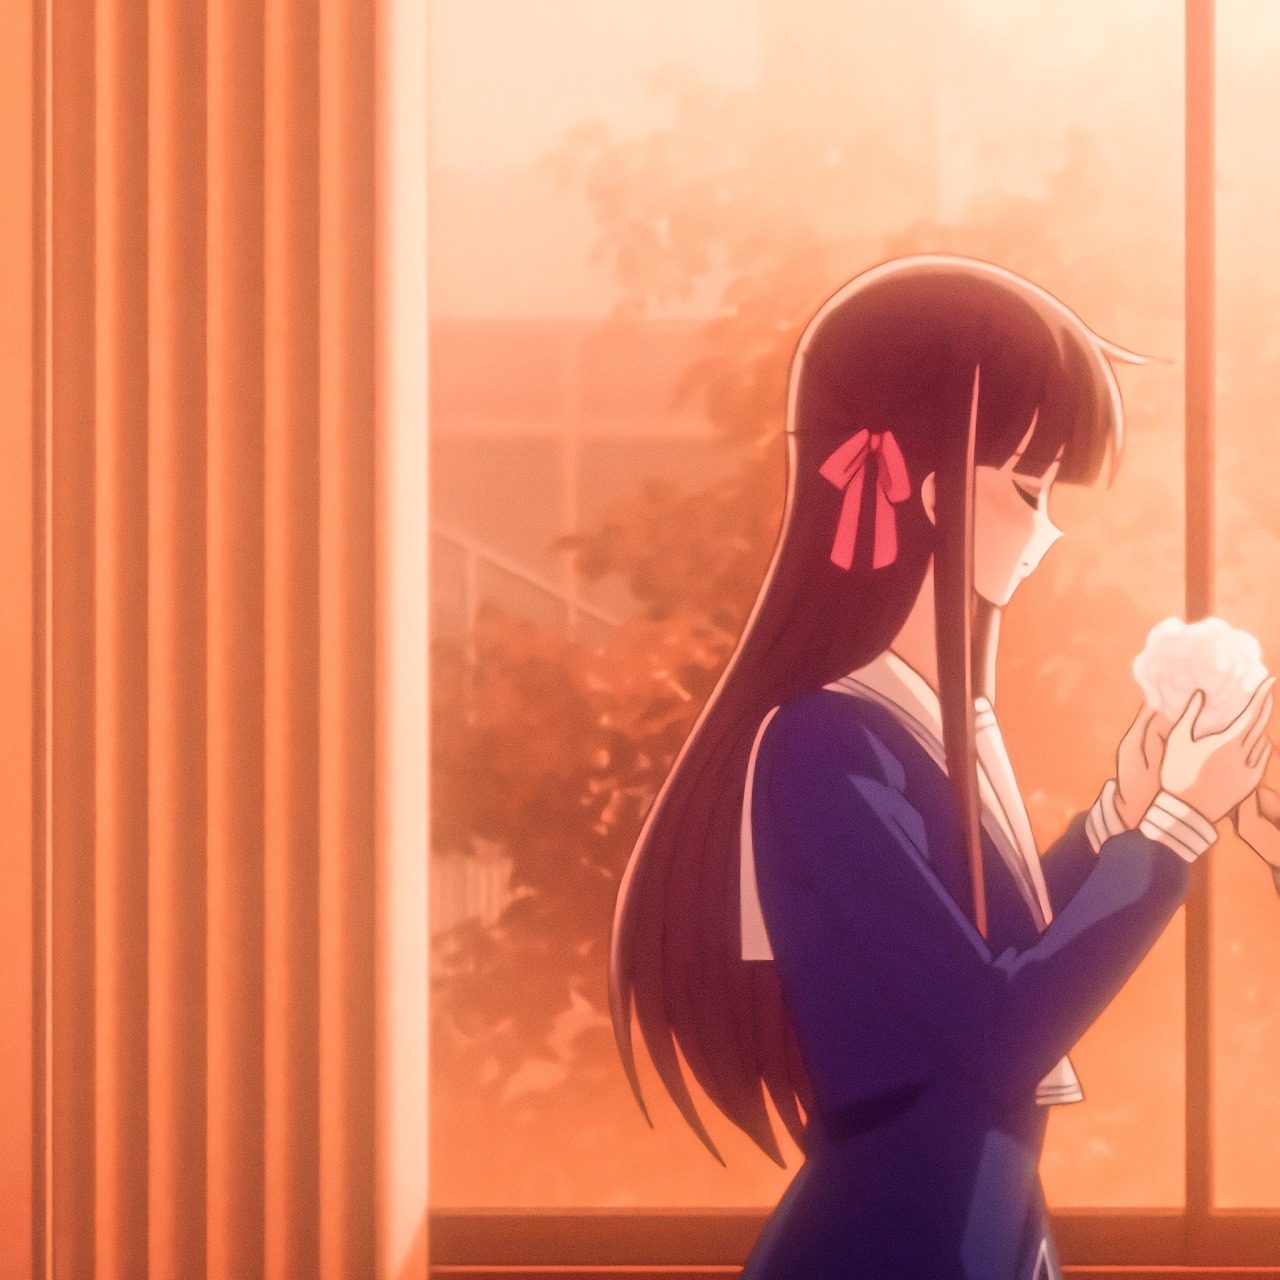 Tohru receiving a flower from Kyo